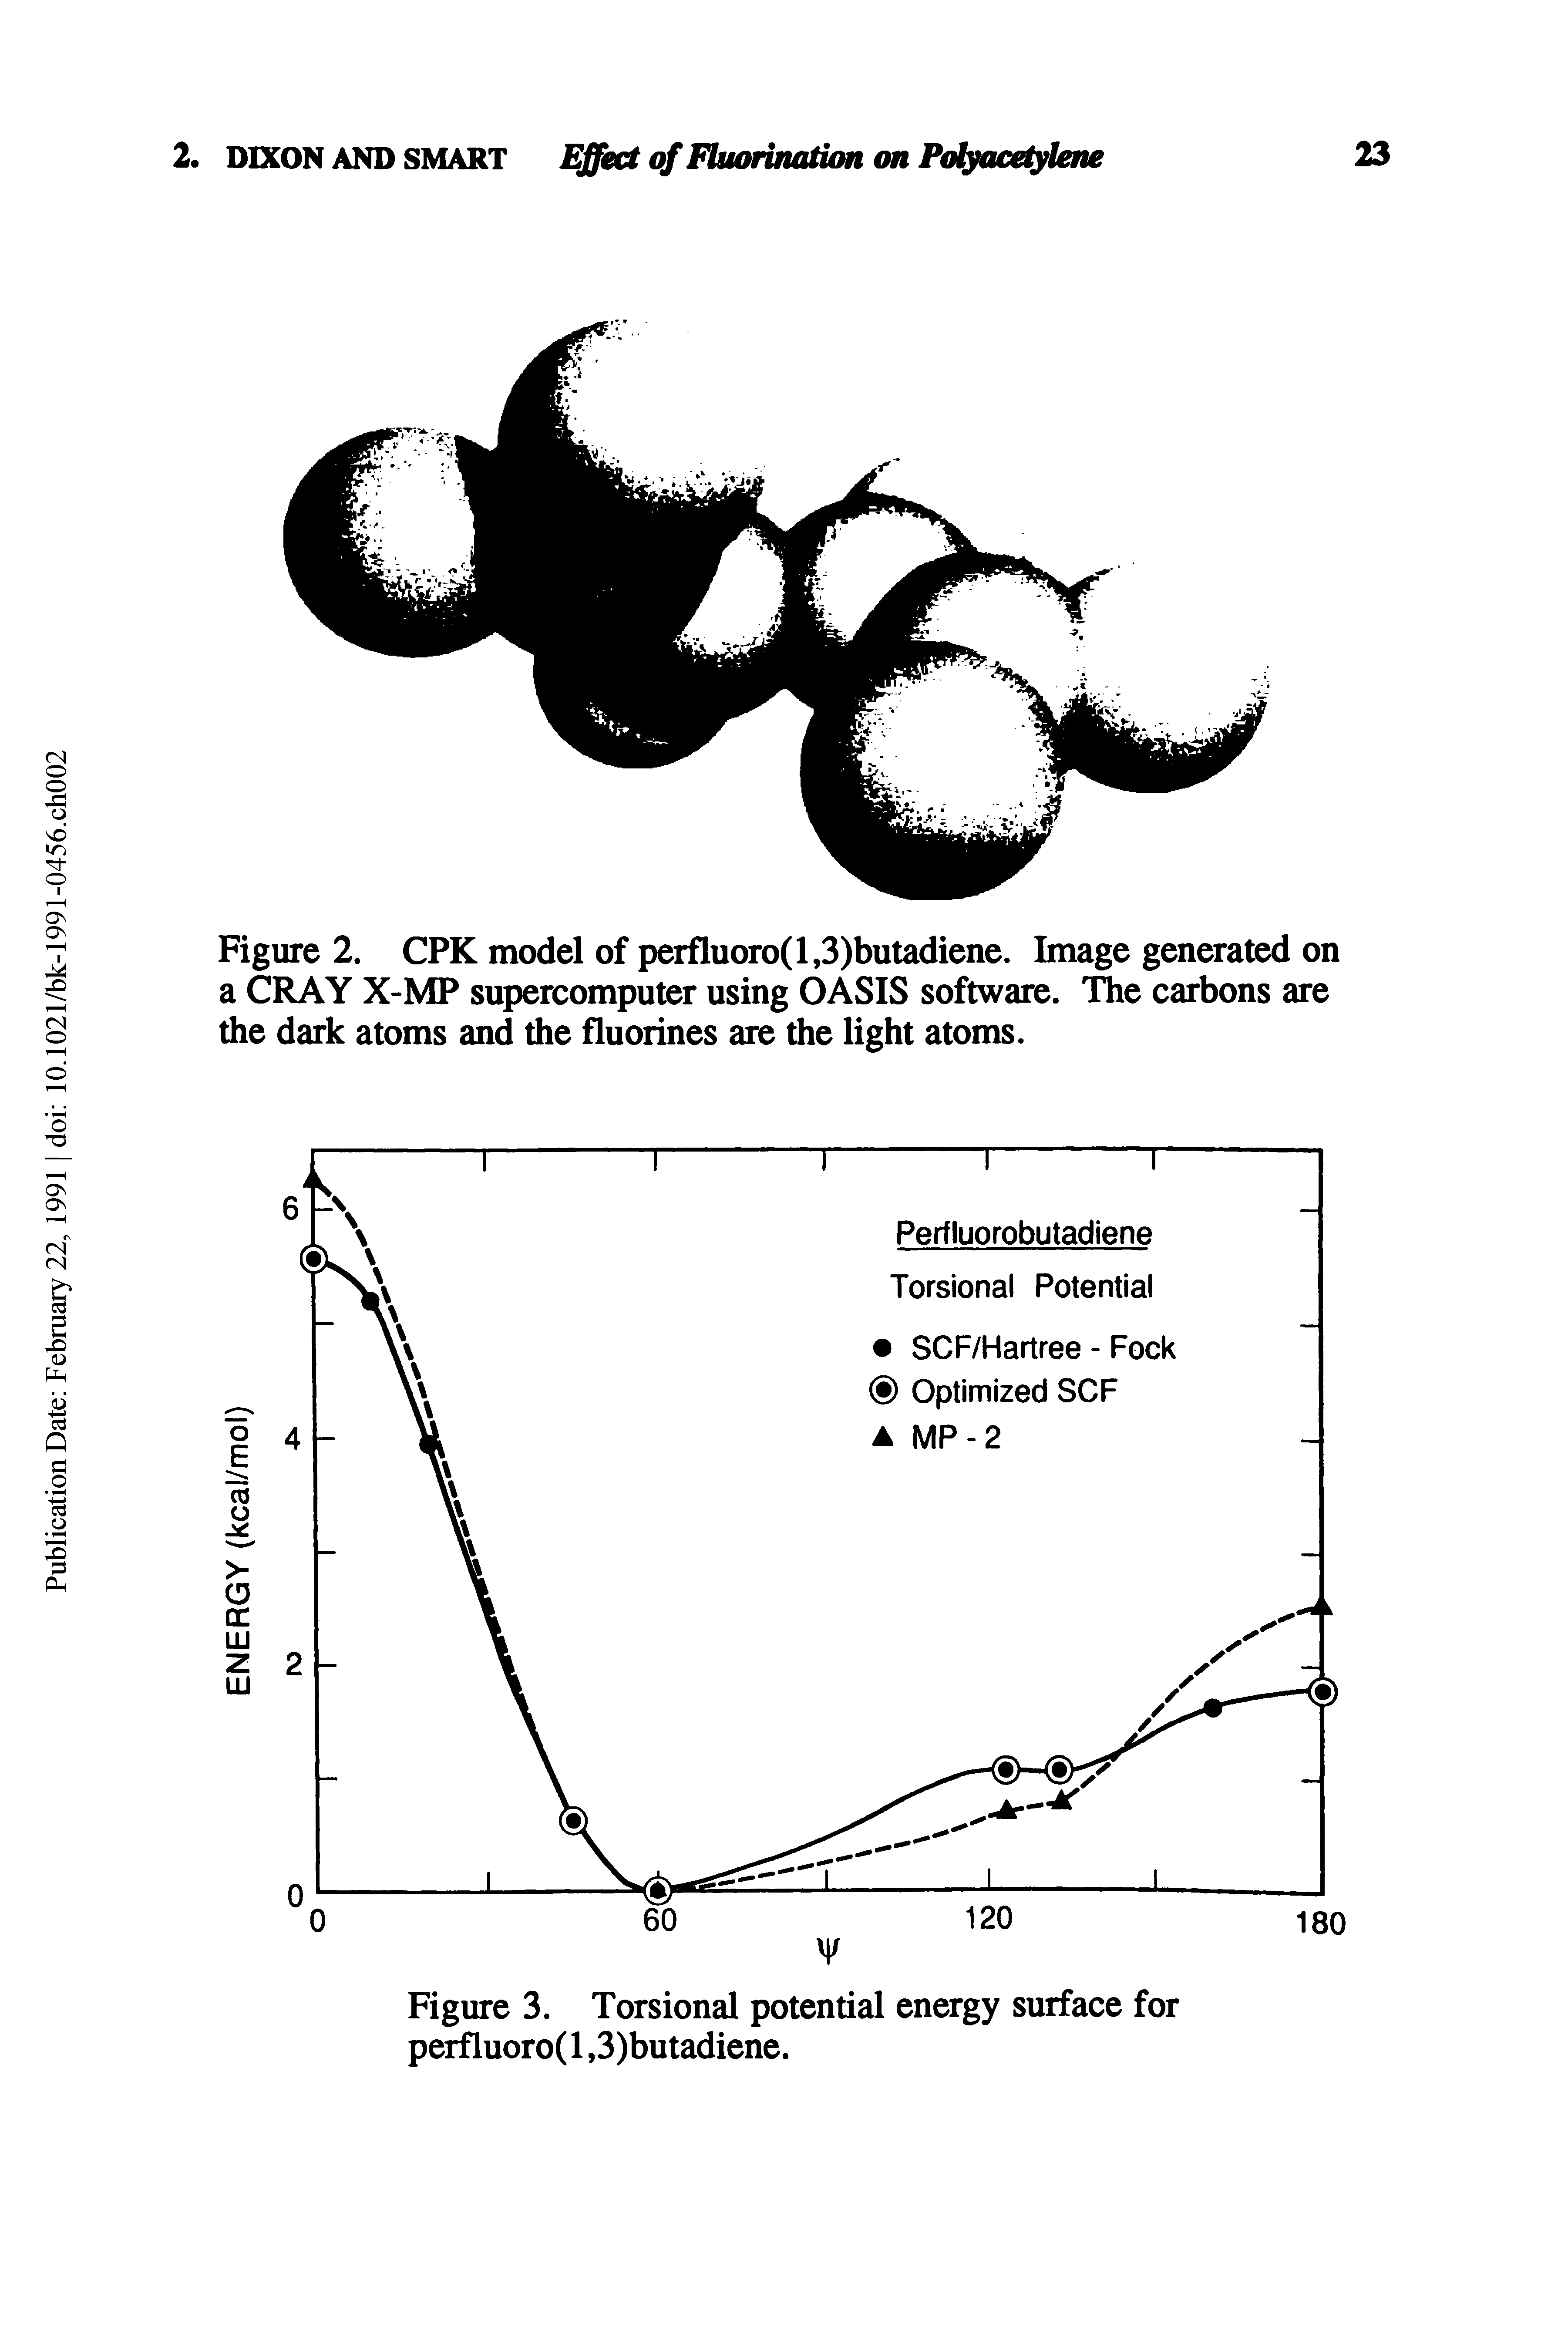 Figure 2. CPK model of perfluoro(l,3)butadiene. Image generated on a CRAY X-MP supercomputer using OASIS software. The carbons are the dark atoms and the fluorines are the light atoms.